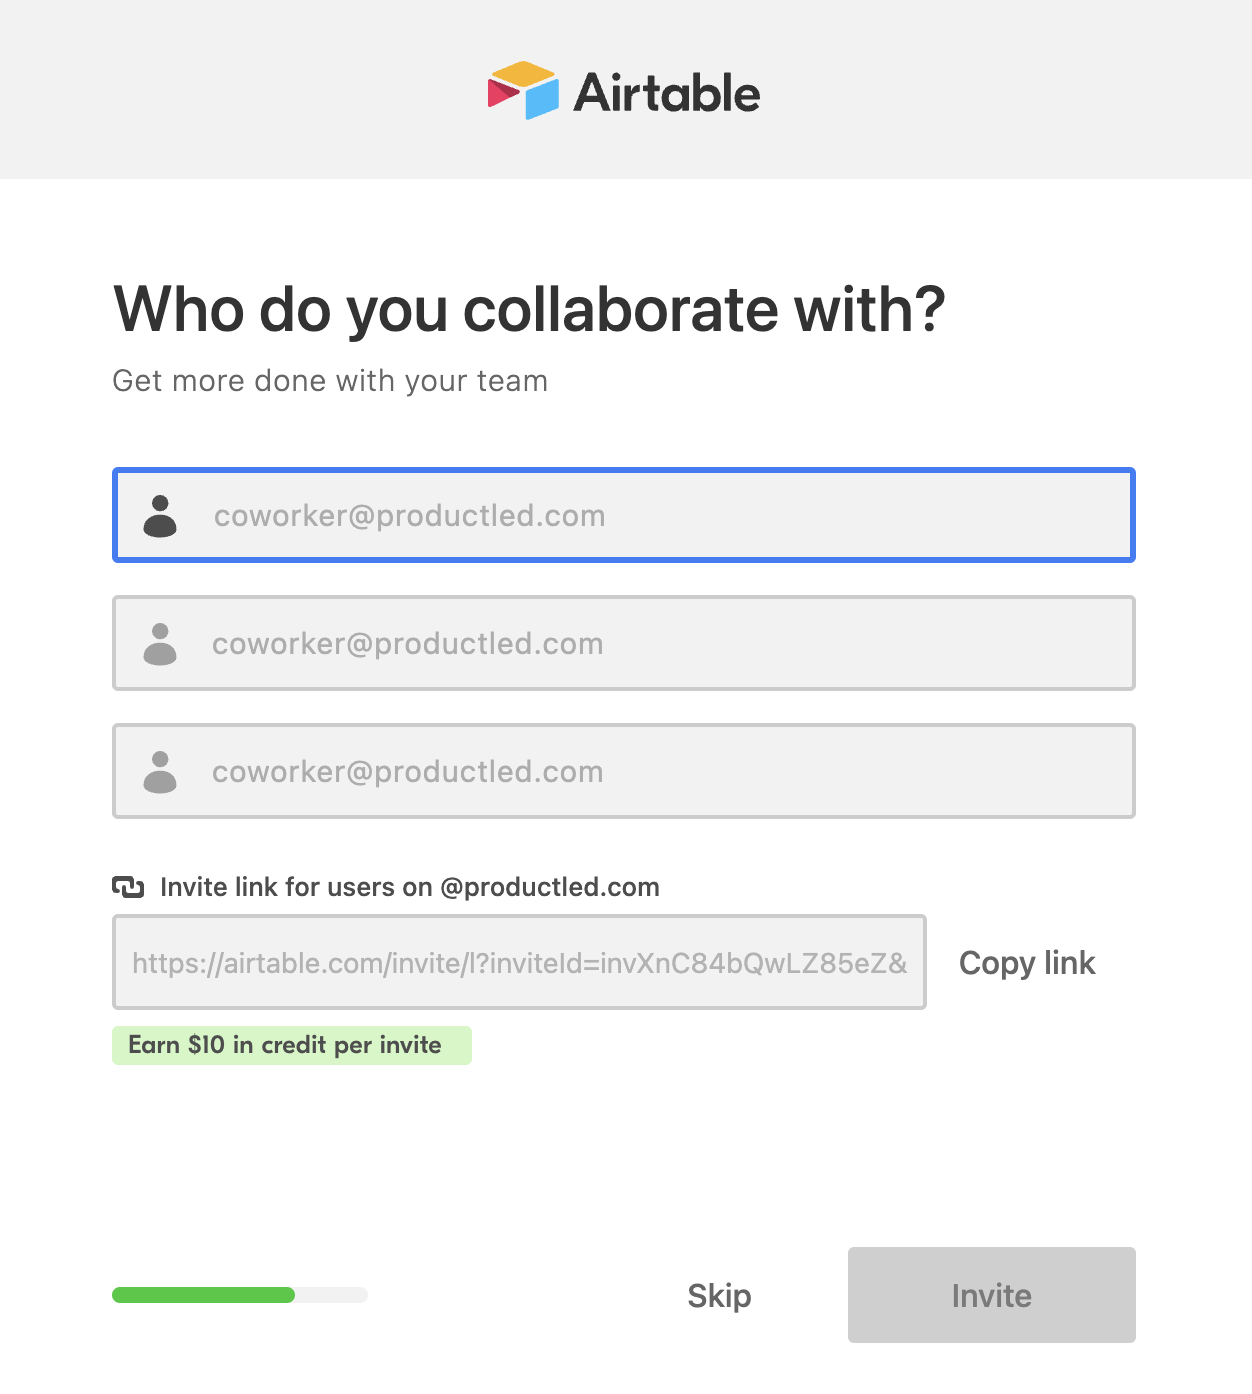 Airtable's onboarding step